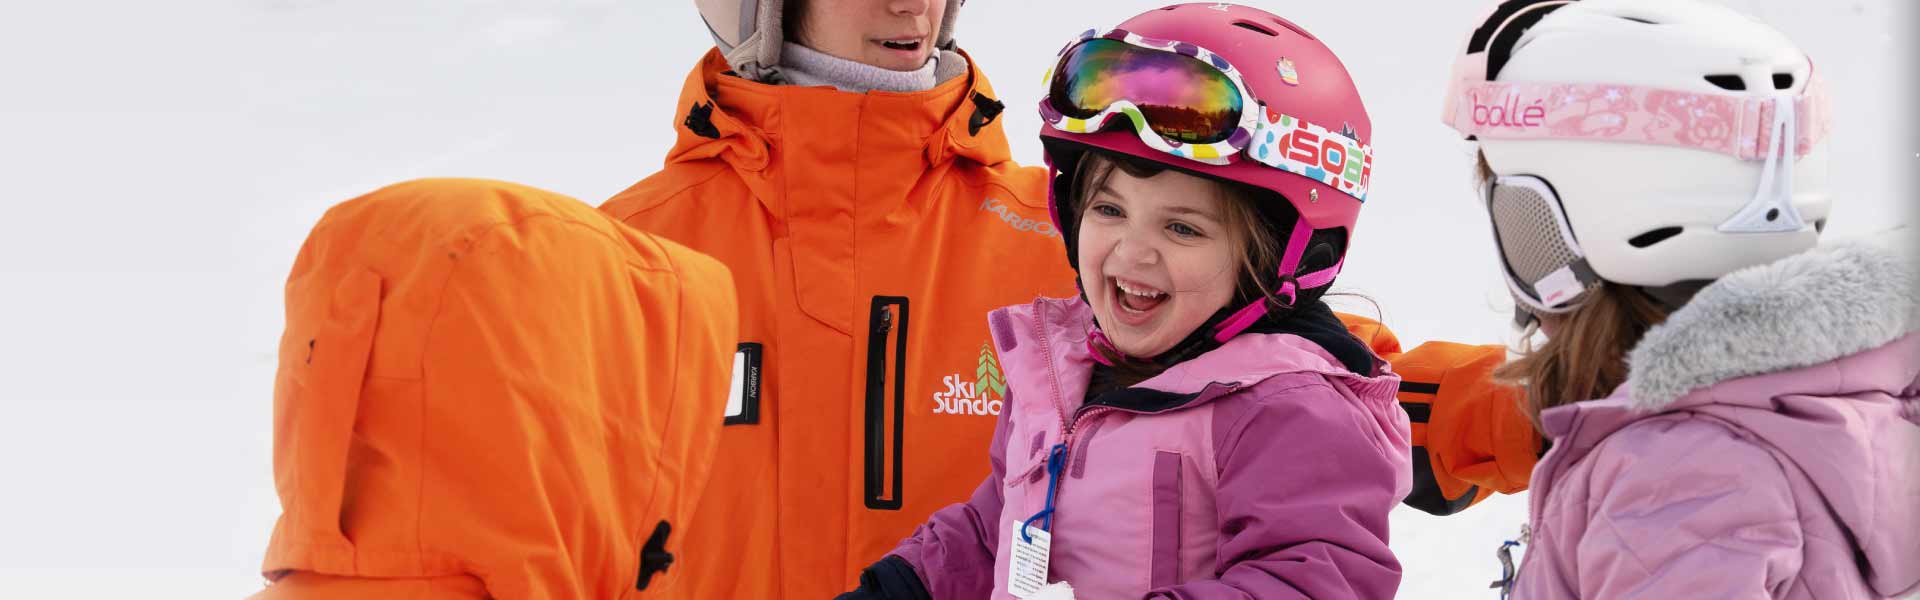 Two girls with their instructors having fun during ski lesson.